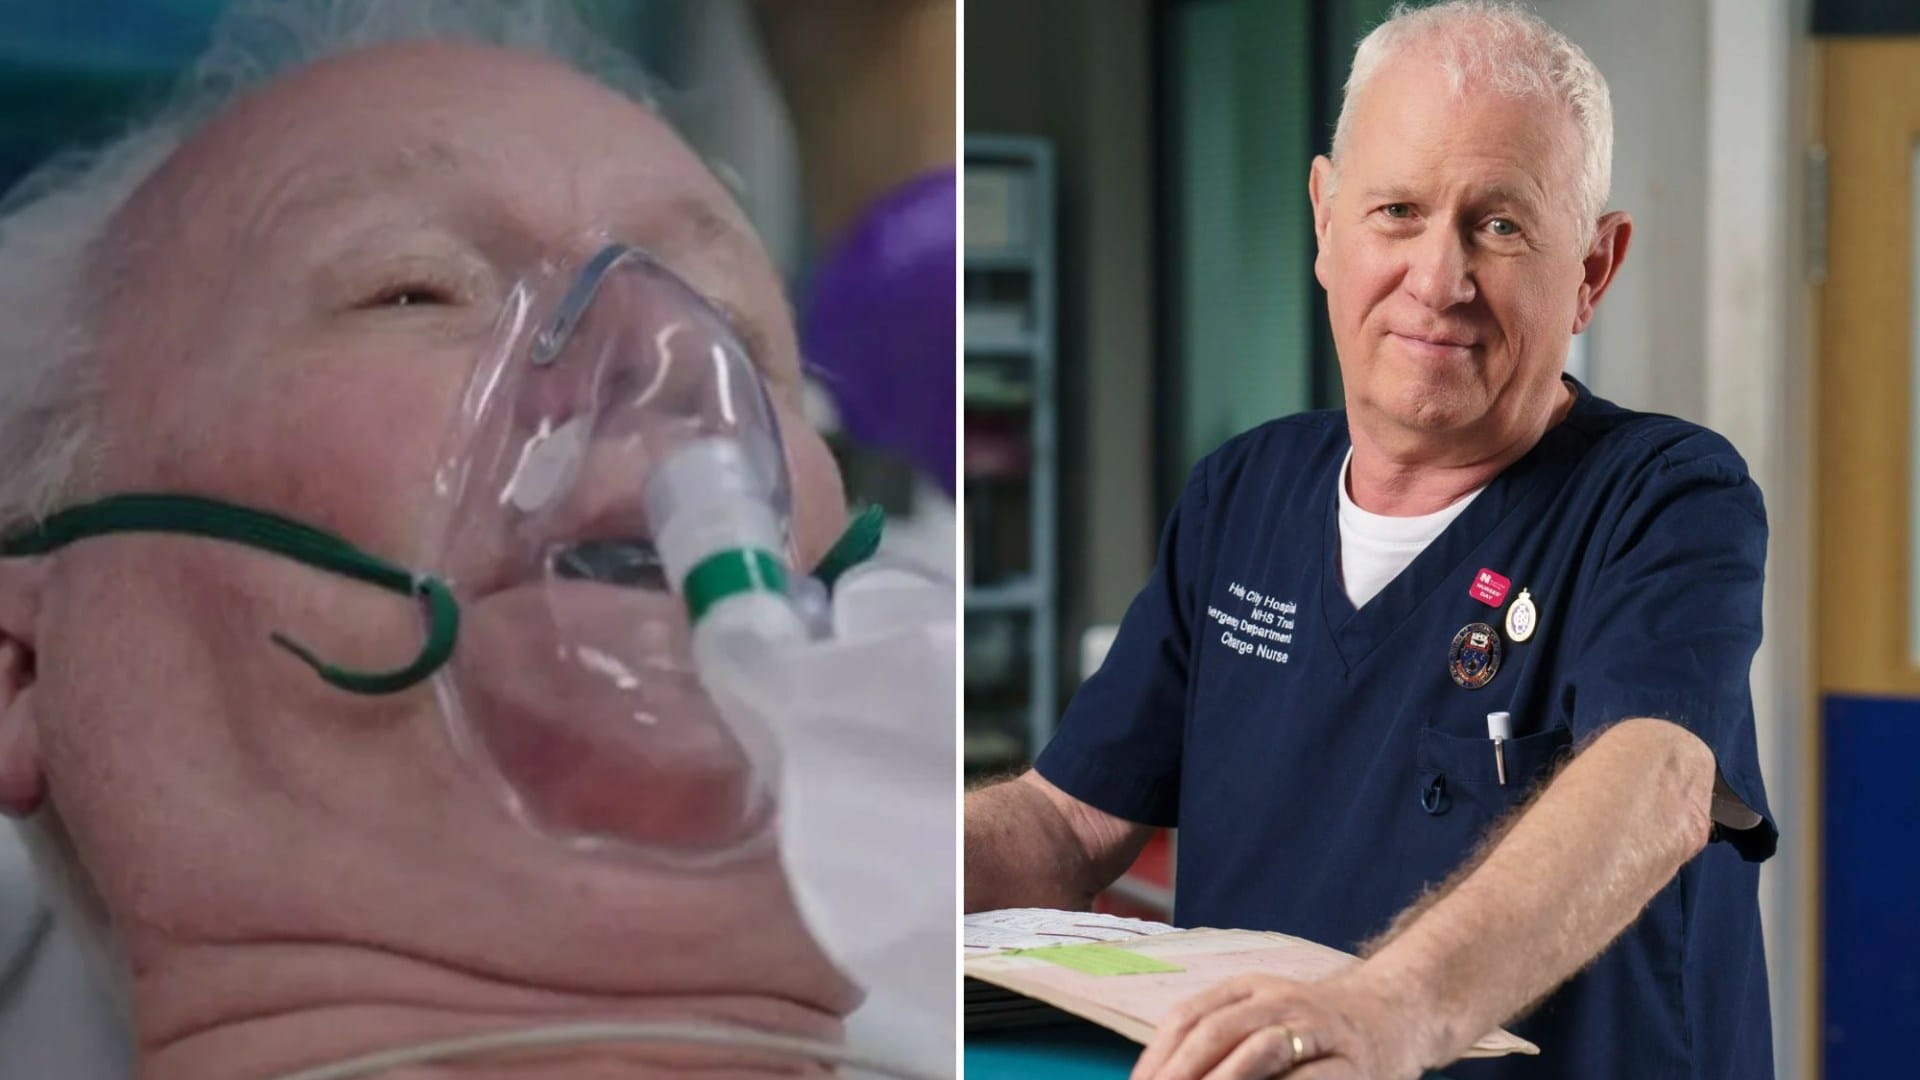 Casualty fans break down over emotional Charlie Fairhead exit after 38 years